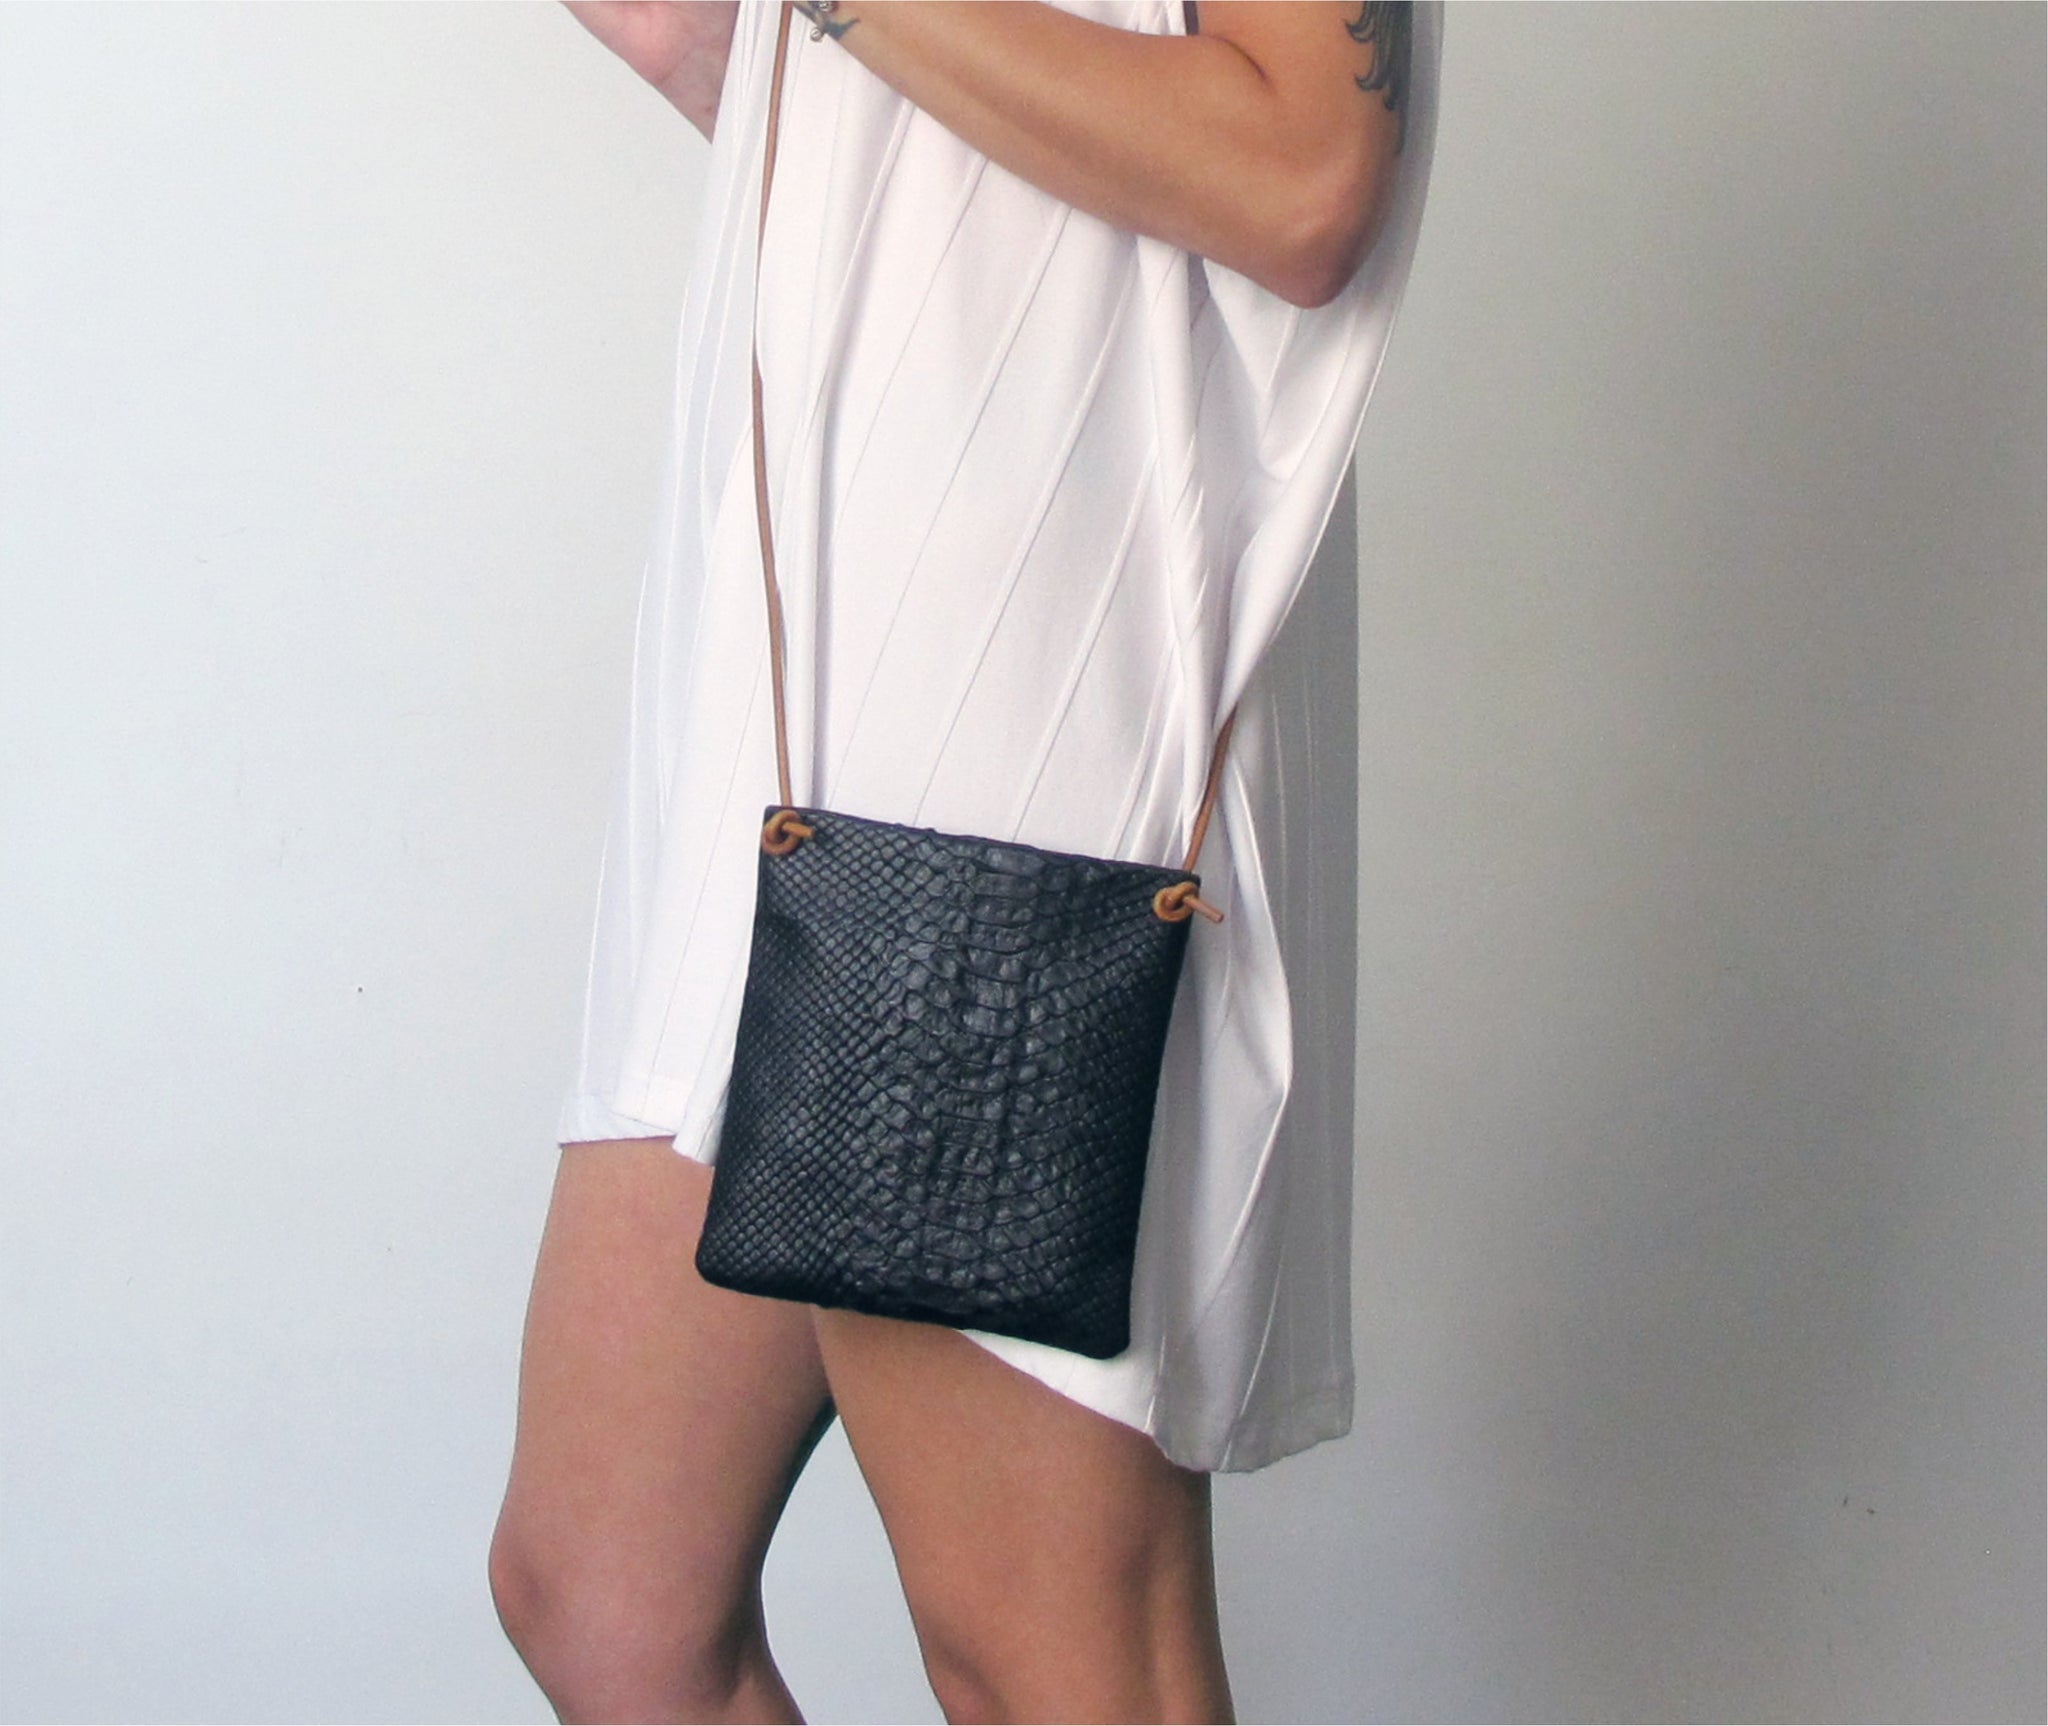 The black python purse is crafted in rich Italian leather with an adjustable & detachable shoulder strap to carry it crossbody or as an evening clutch. 